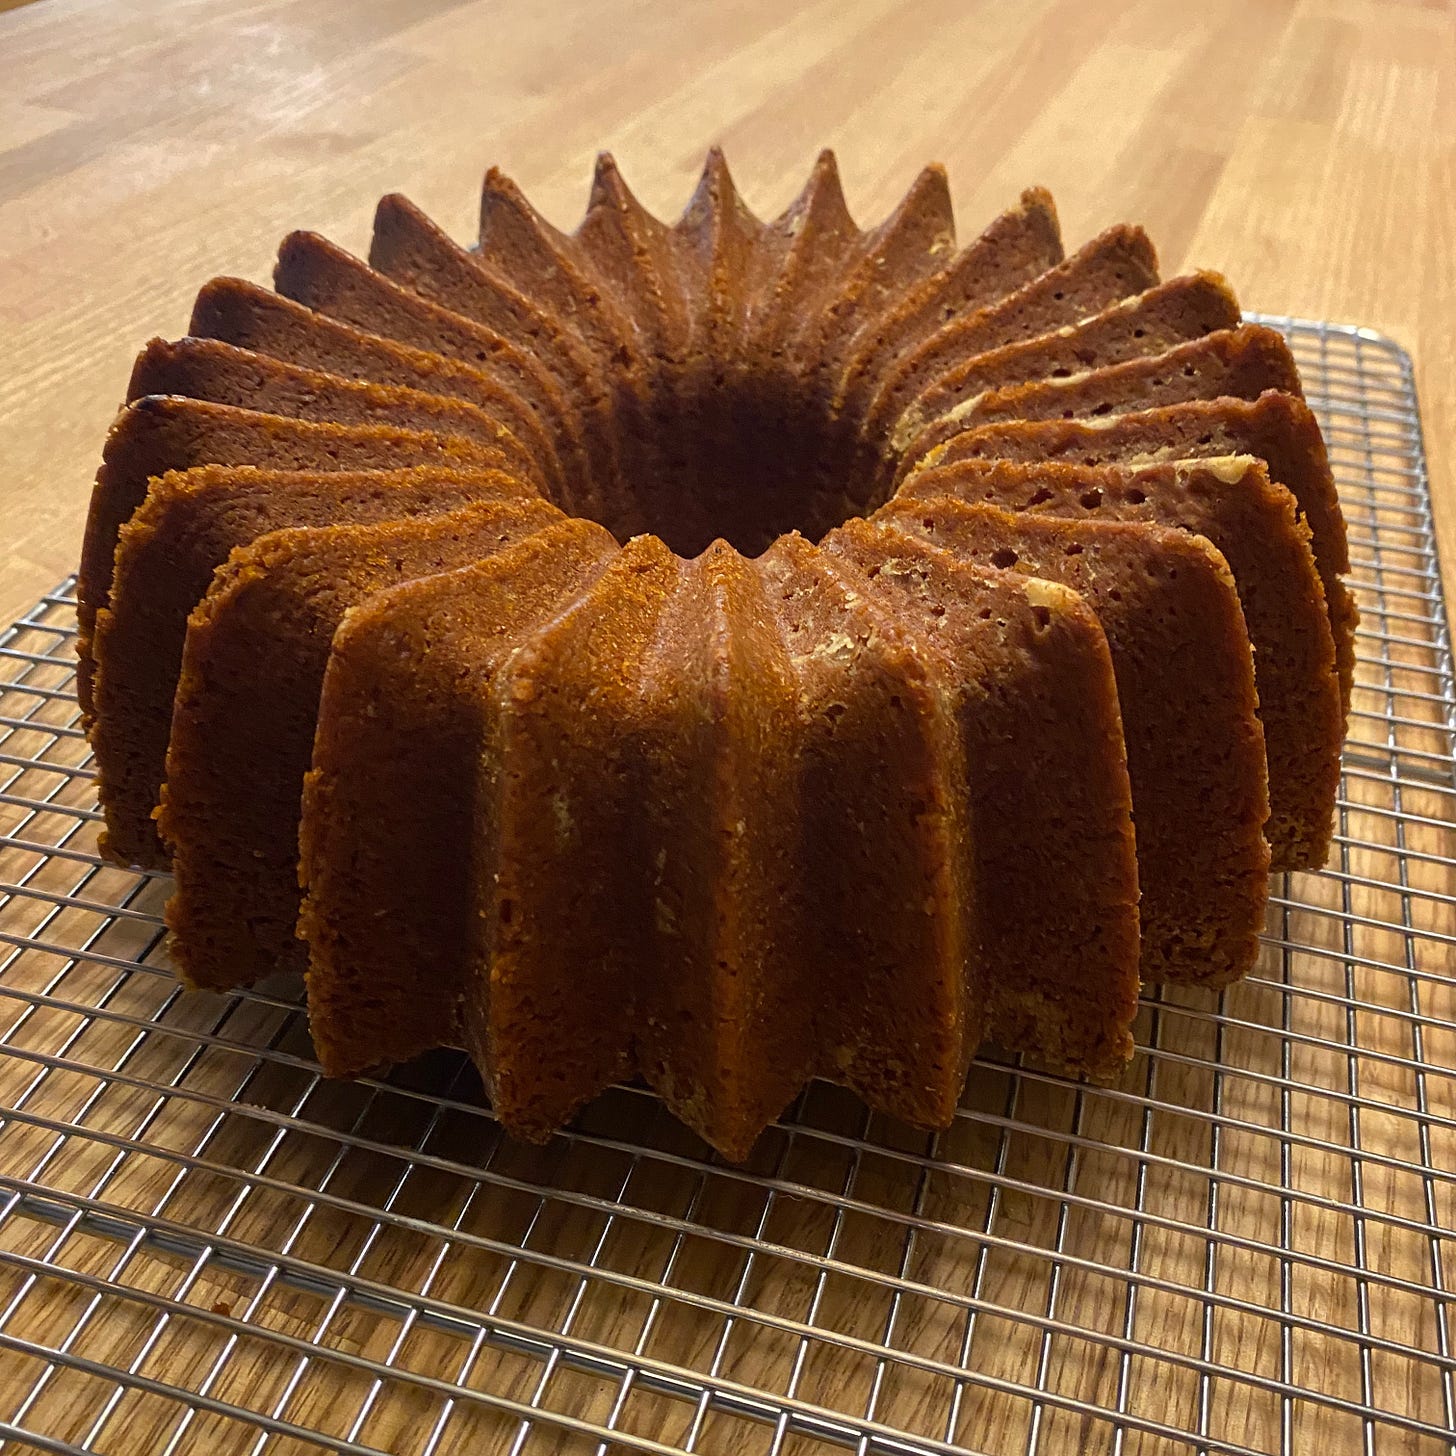 A round, golden brown bunt cake with many small ridges sits on a cooling rack on a kitchen island.